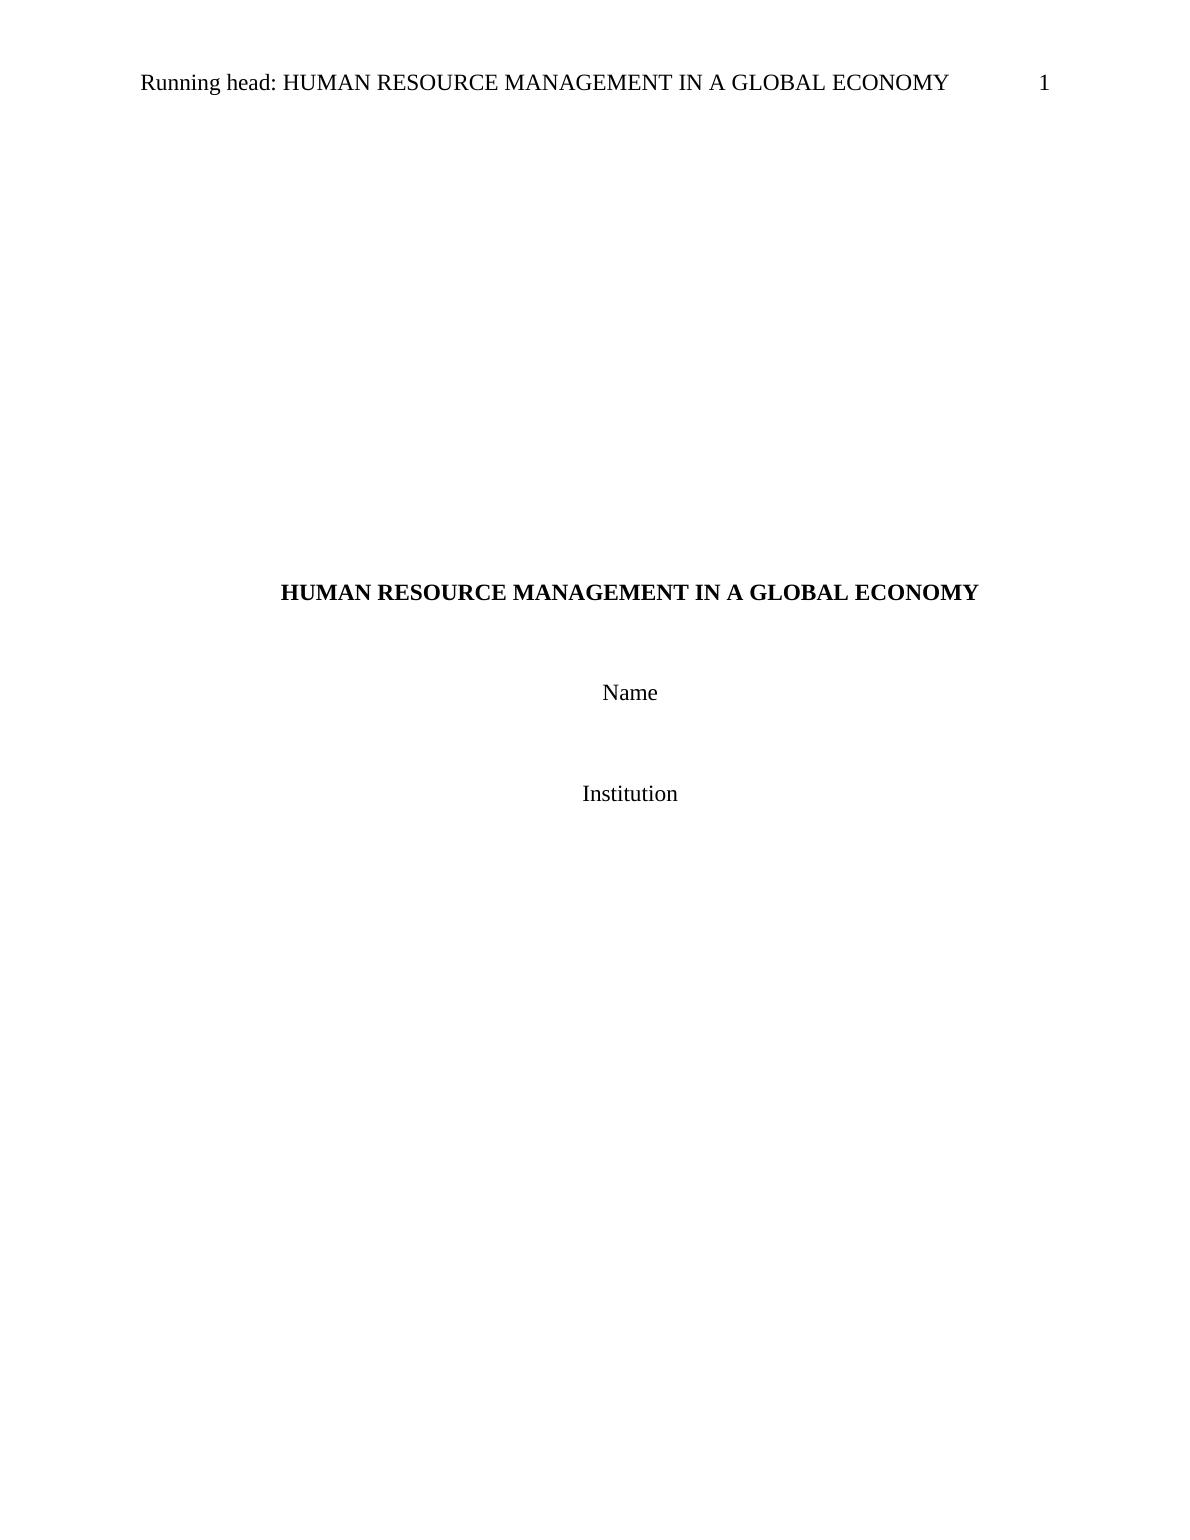 Human Resource Management in a Global Economy_1